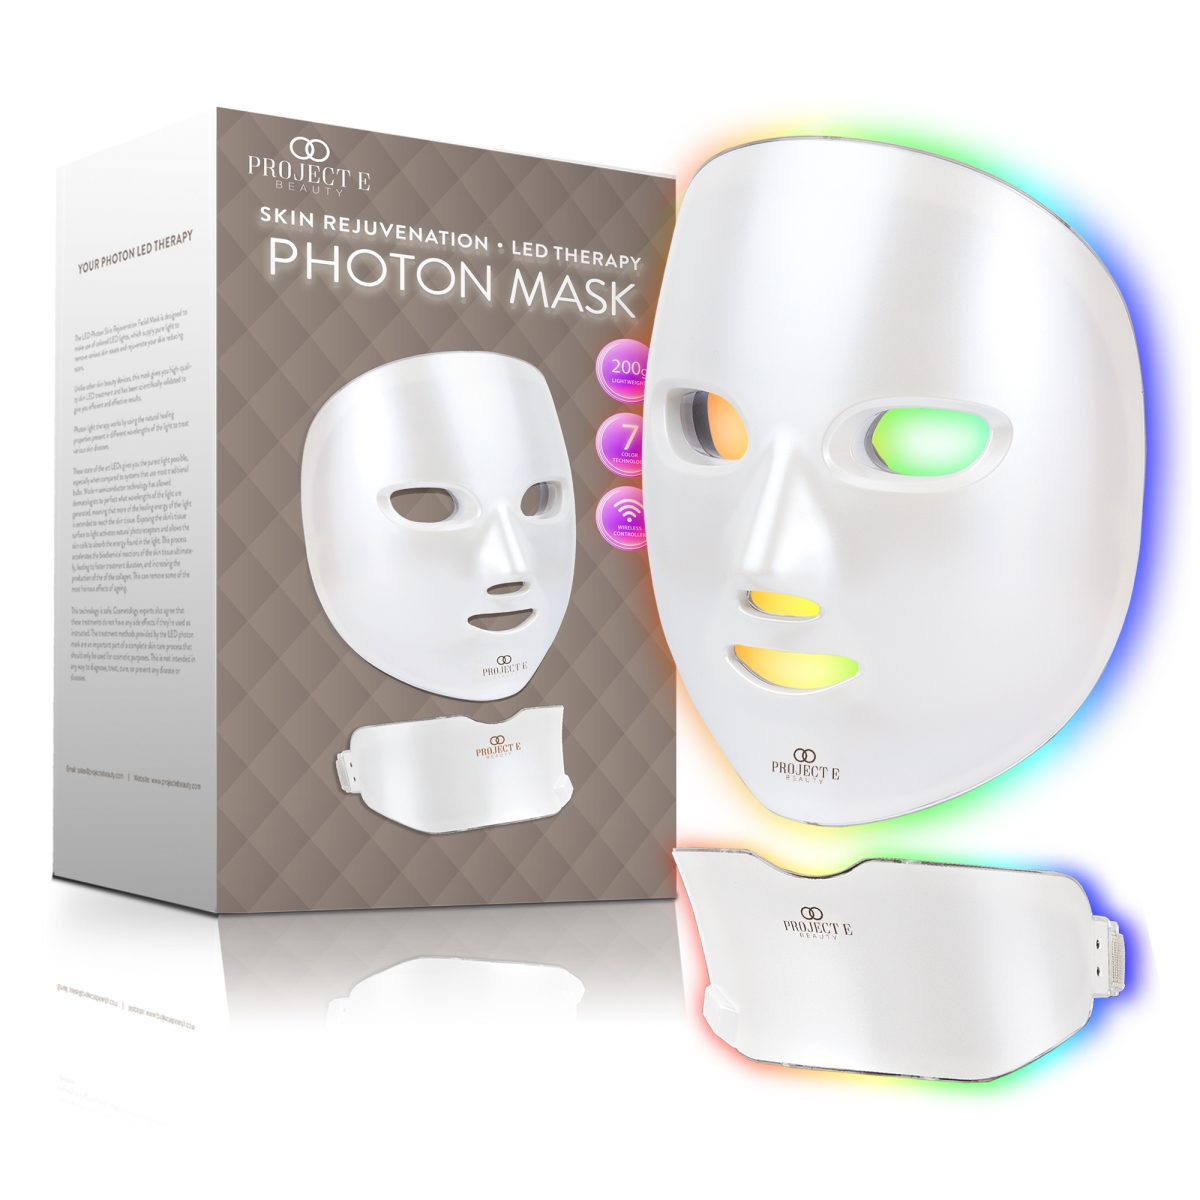 PE706  PE706 LED Light Therapy Mask | Wireless Photon Skin Rejuvenation | Therapy 7 Color Treatment Anti Aging -  Project E Beauty